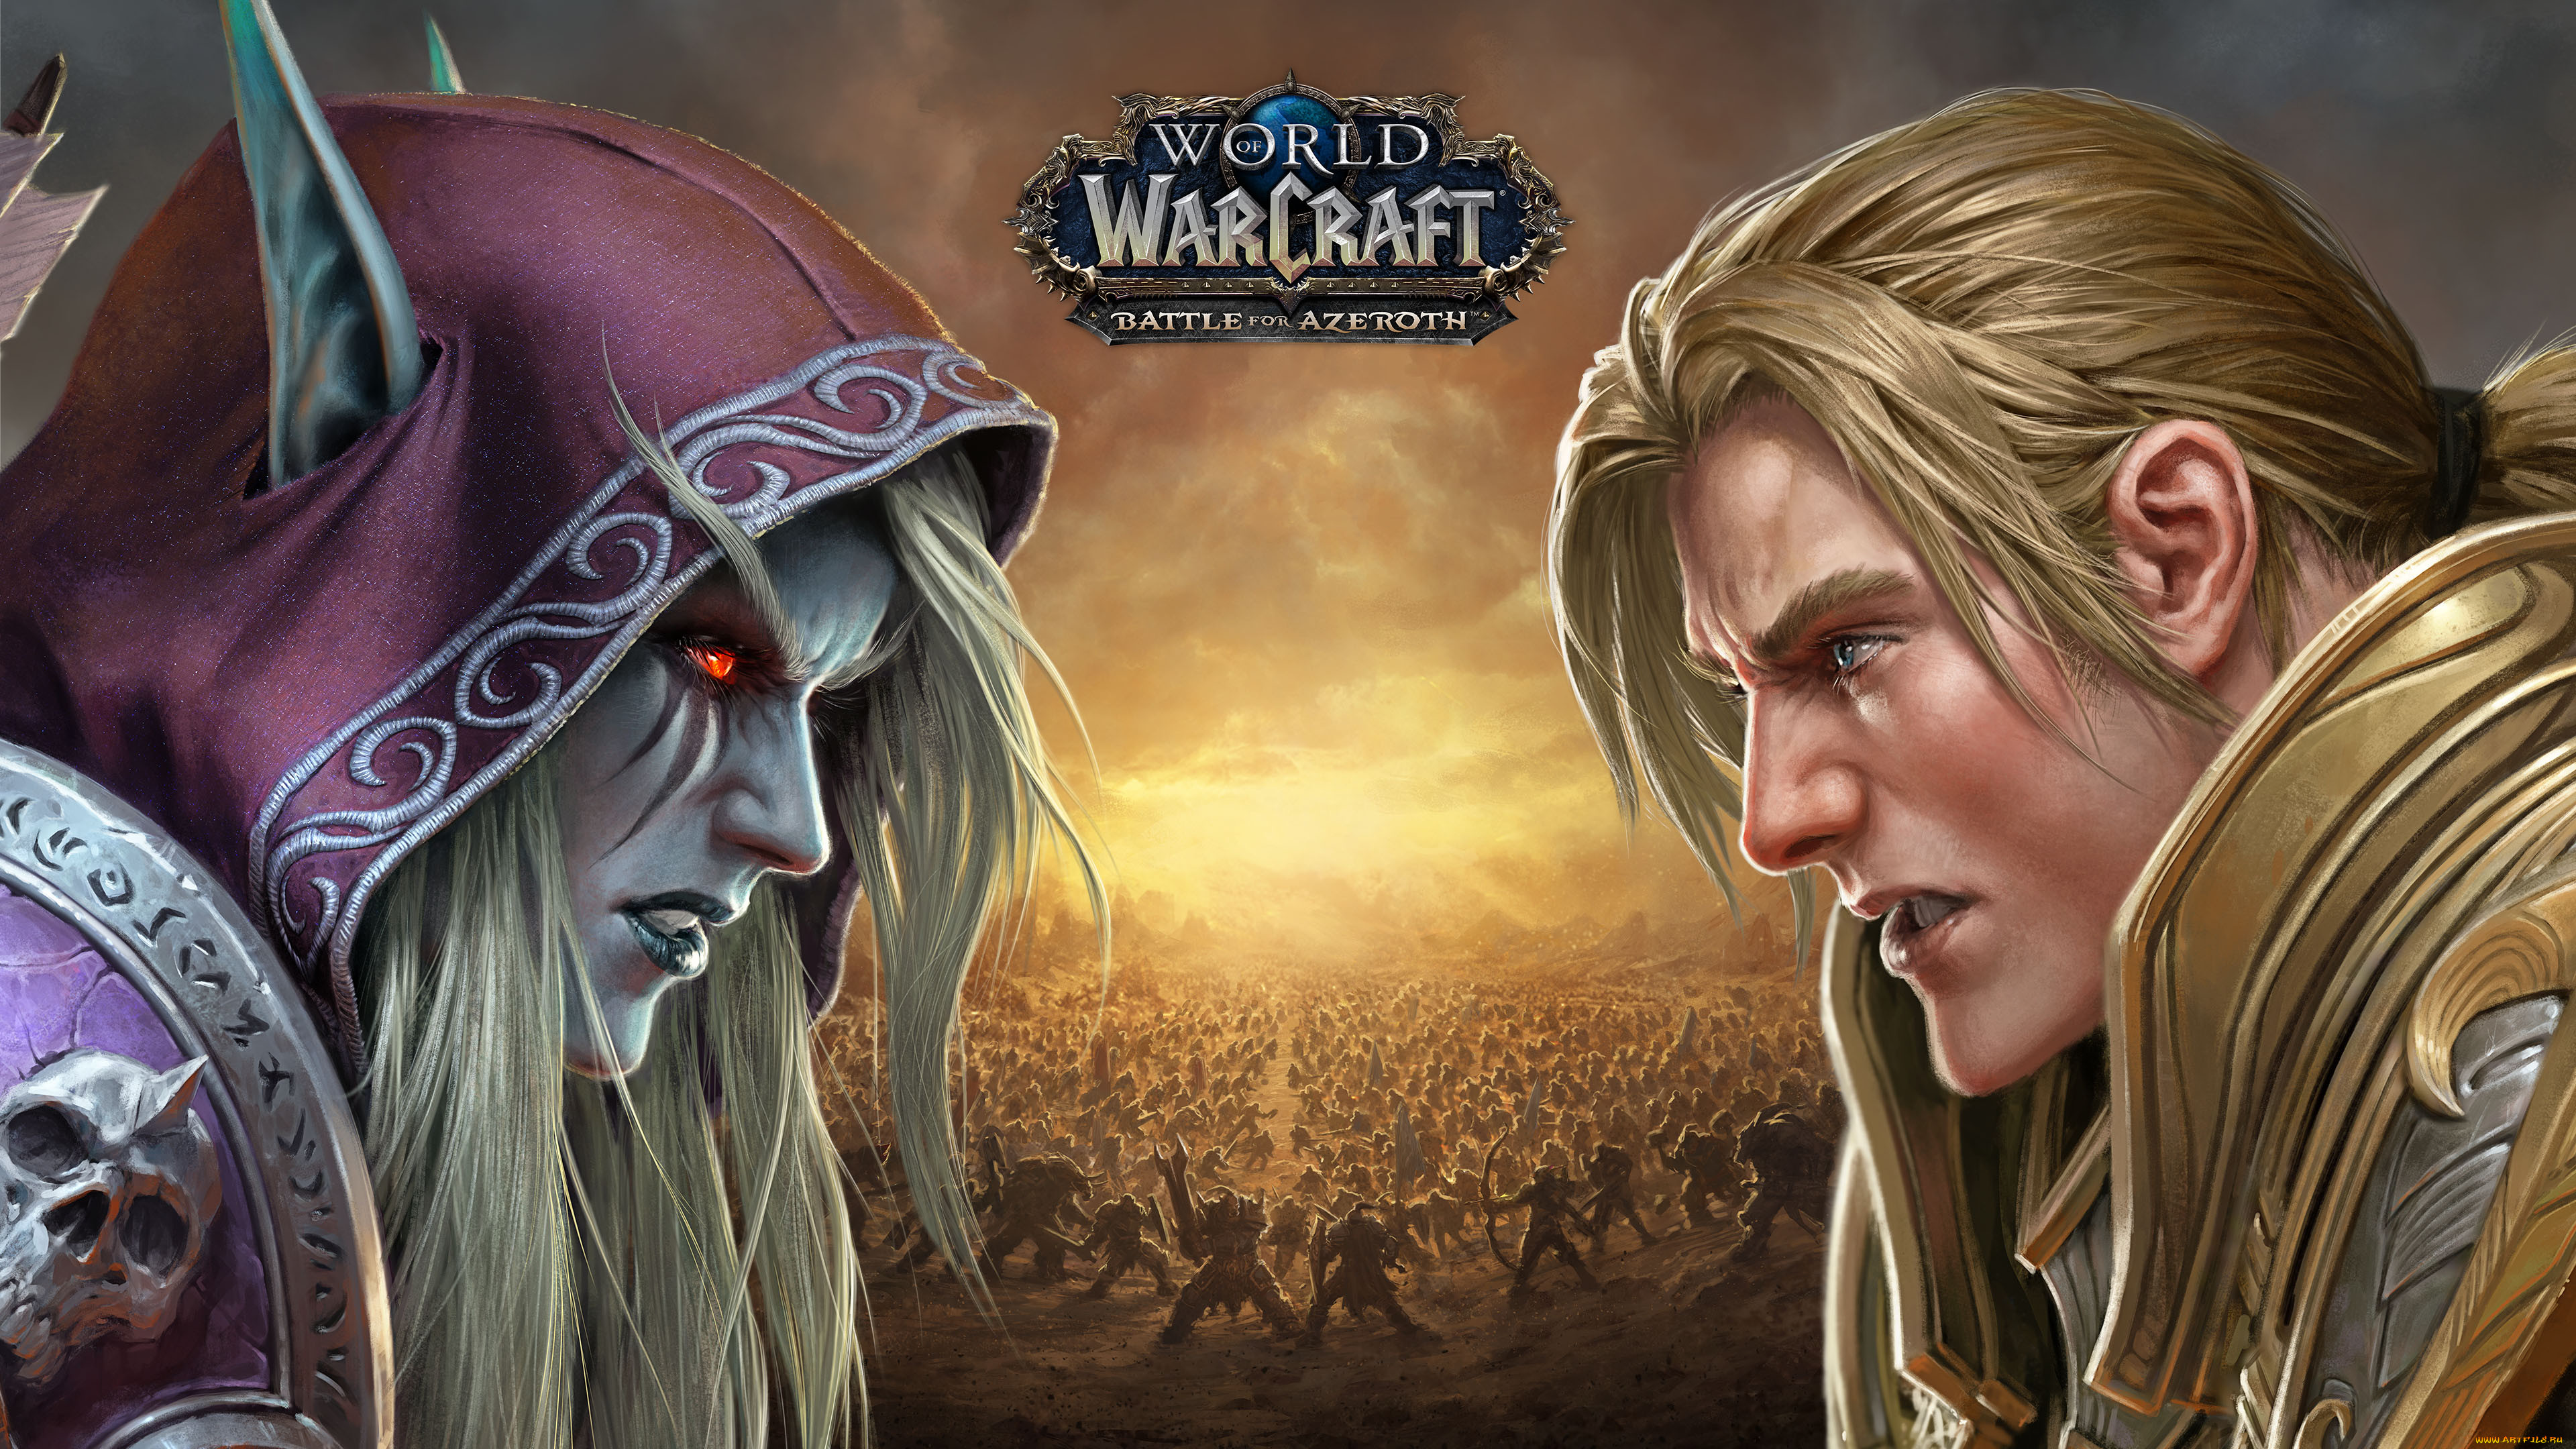  , world of warcraft,  battle for azeroth, world, of, warcraft, battle, for, azeroth, 